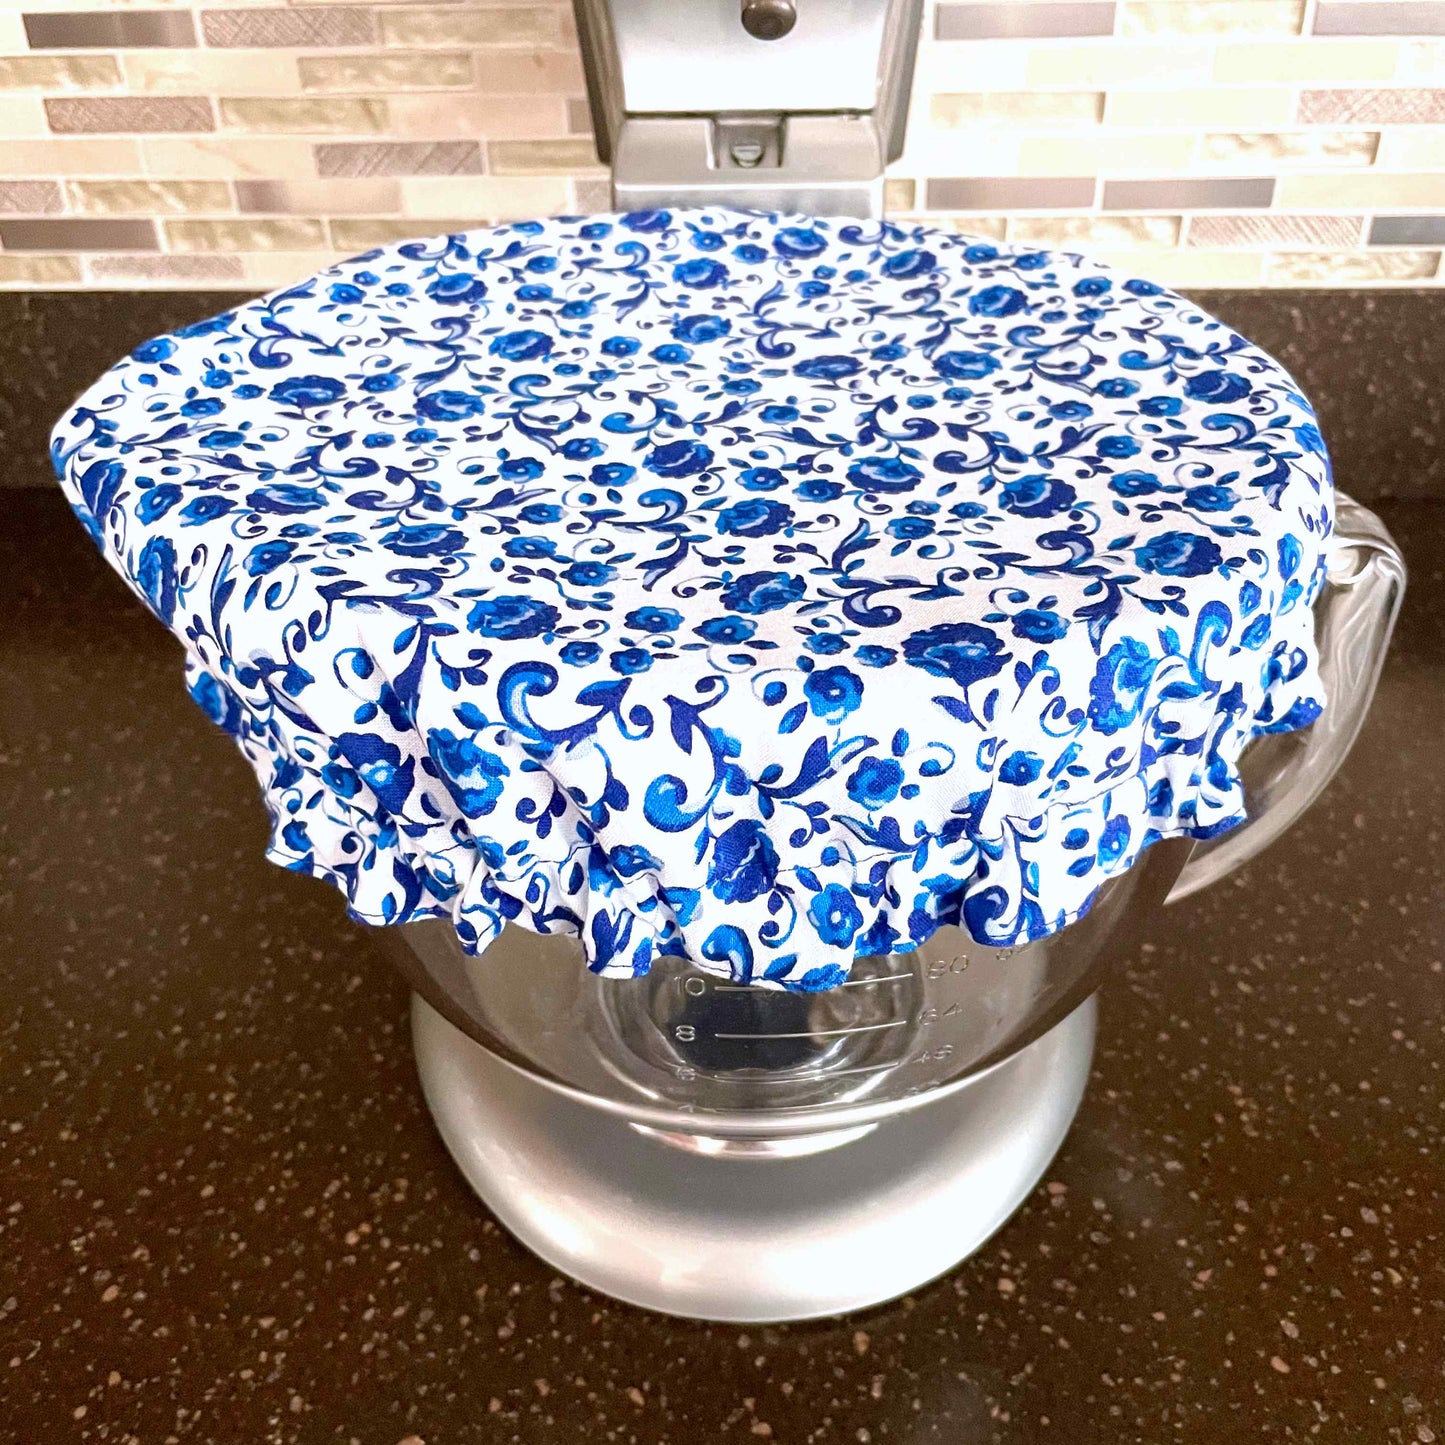 Stand Mixer Bowl Covers - Pioneer Woman Scroll Floral XL Bowl Cover